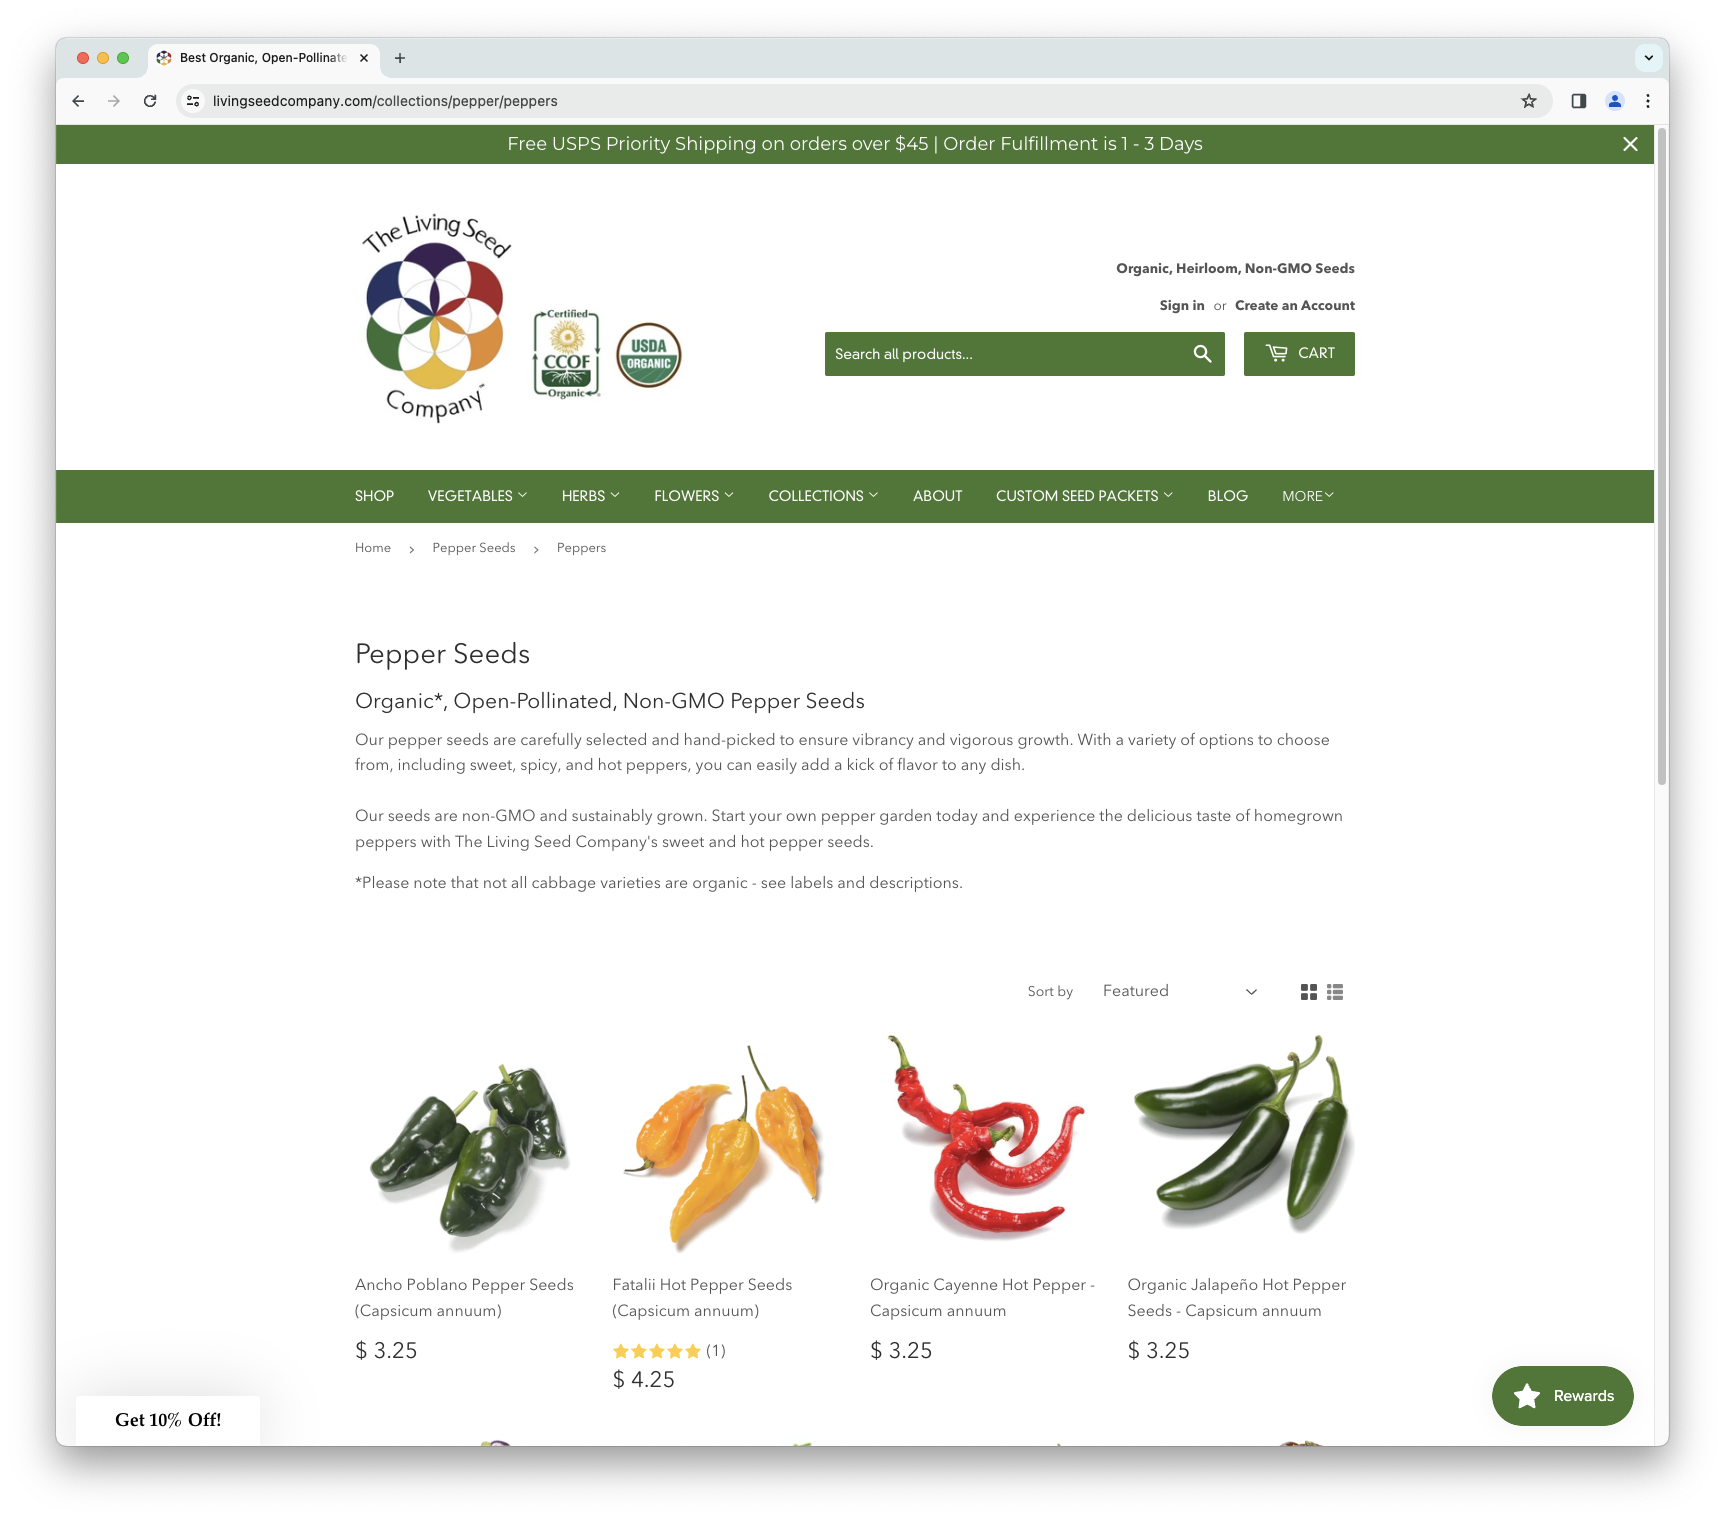 The Living Seed Company website